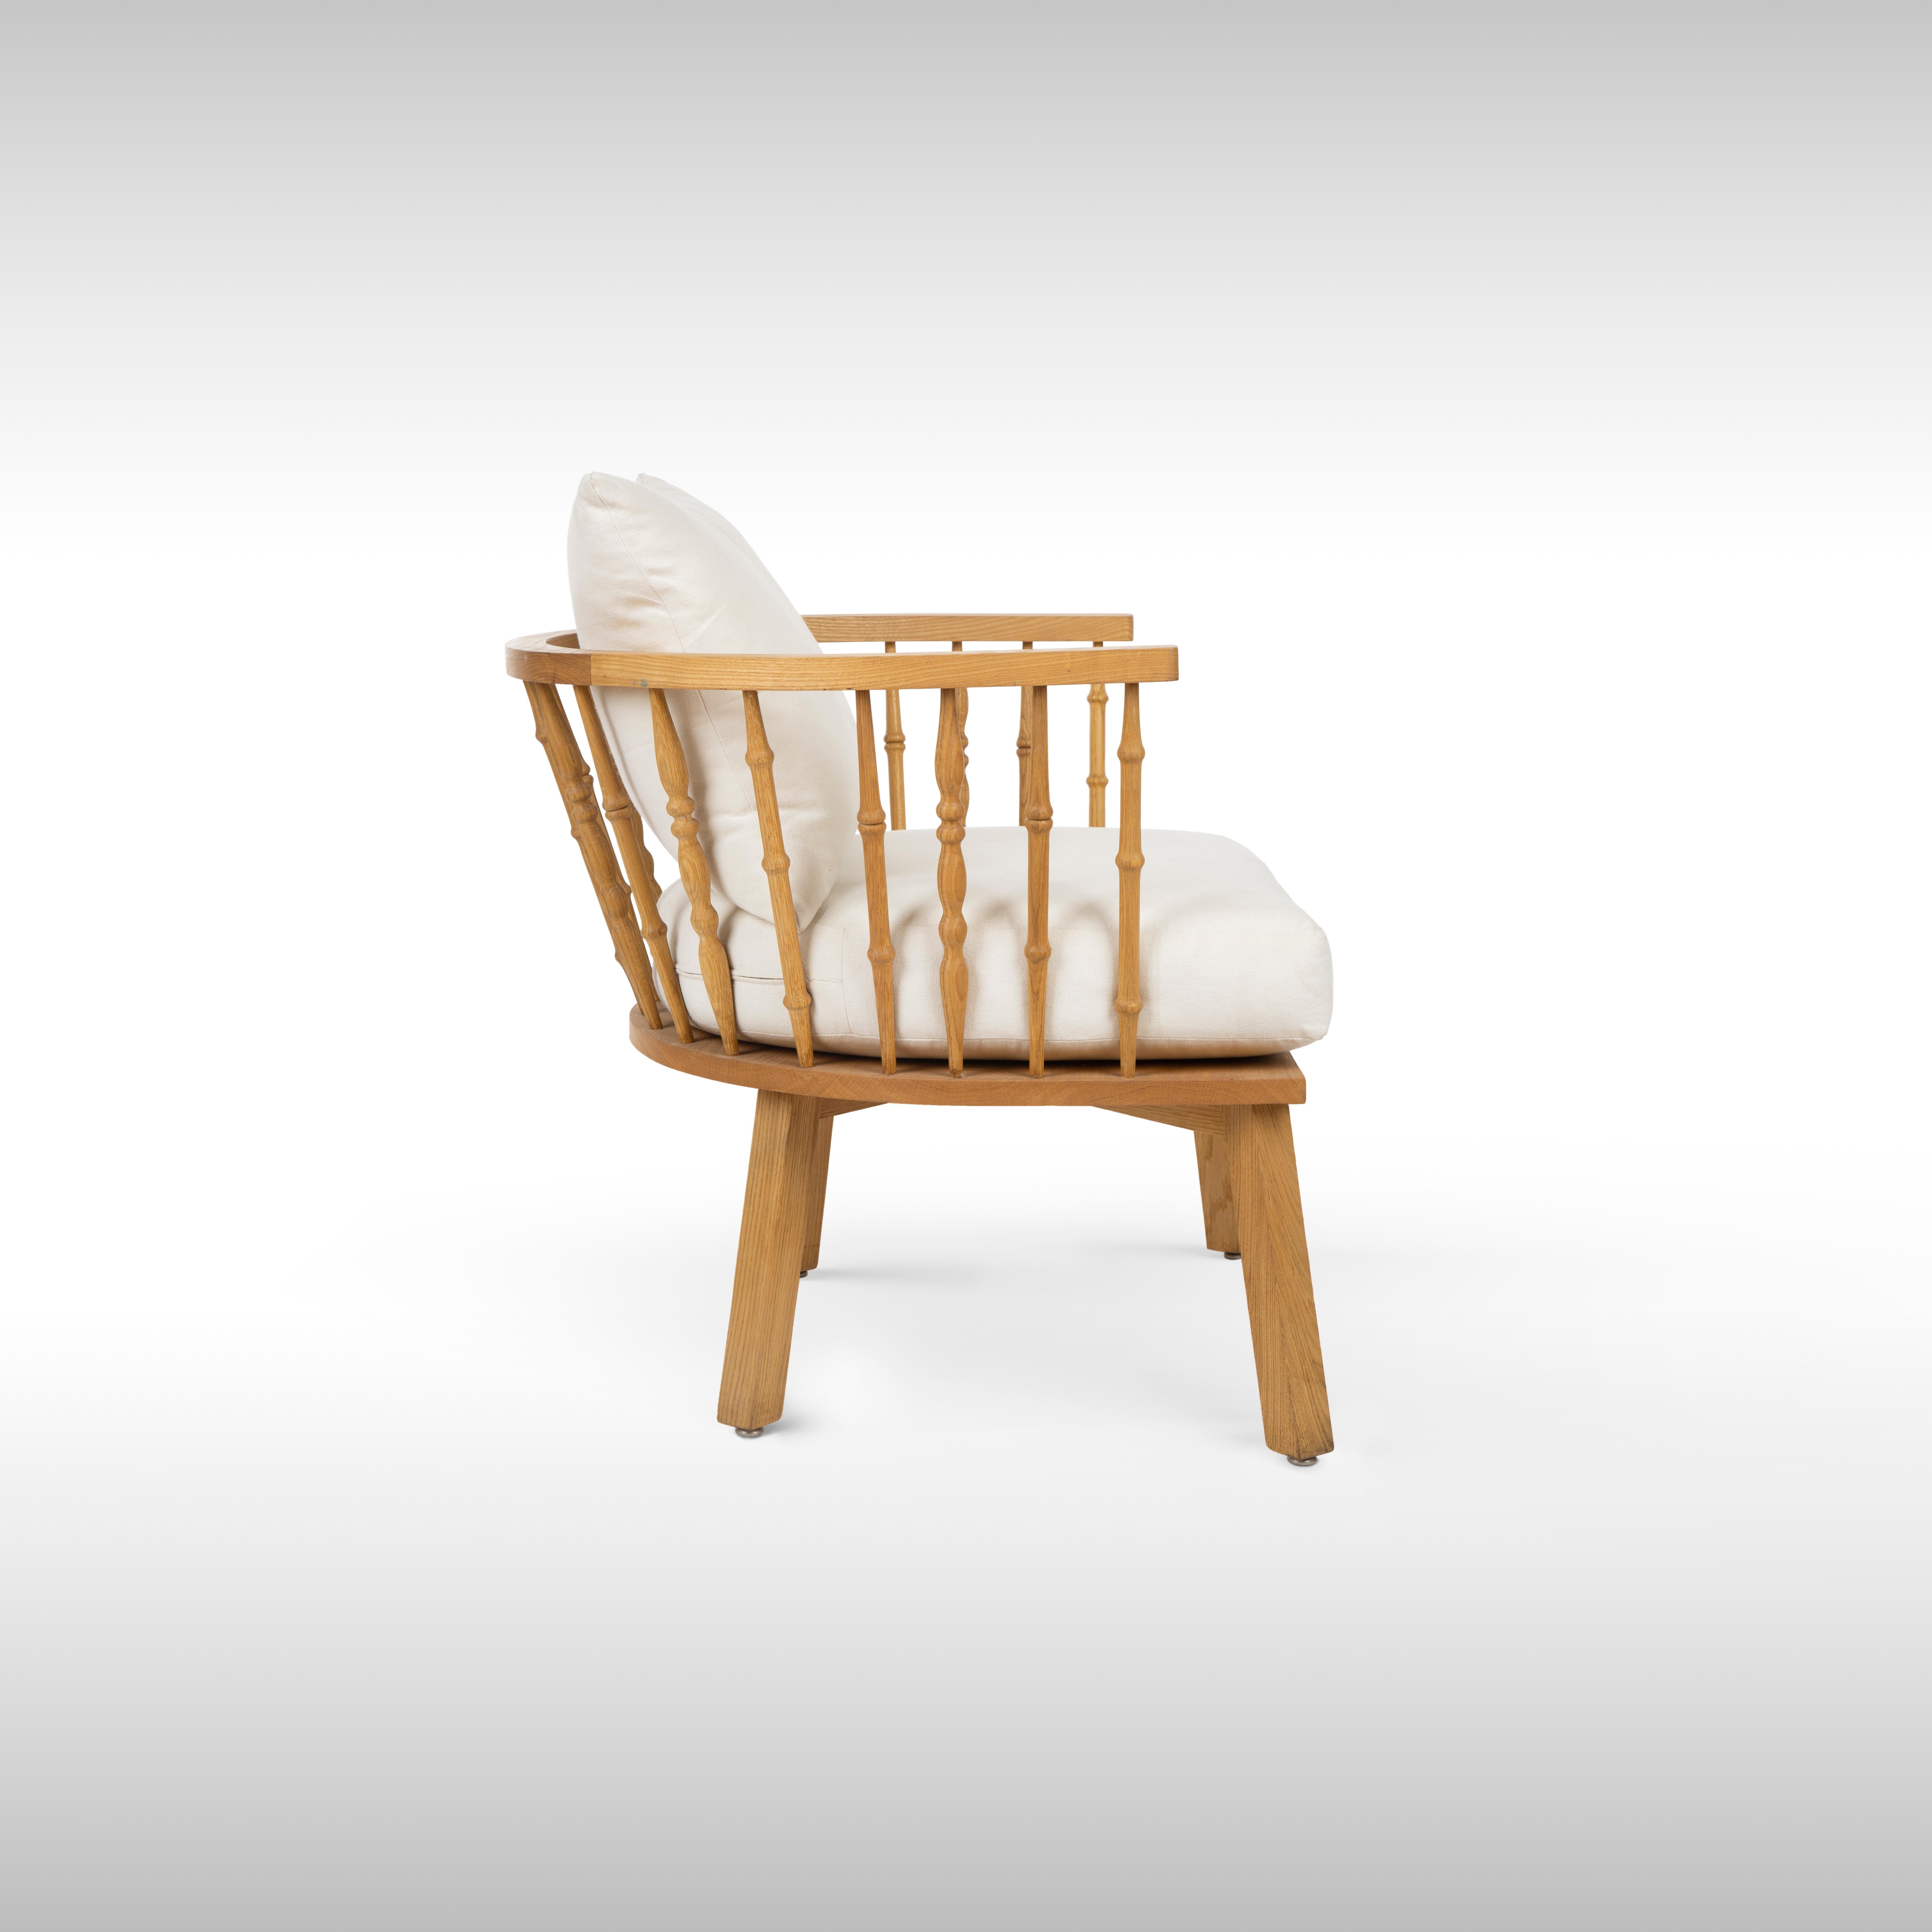 Outdoor oil-treated oak wood armchair with arabesque-inspired carved backrest.
Take comfortable relaxation inside out with our Patio Armchair. Our outdoor armchair is made from treated Oak outdoor material for durability. Its lean design is a